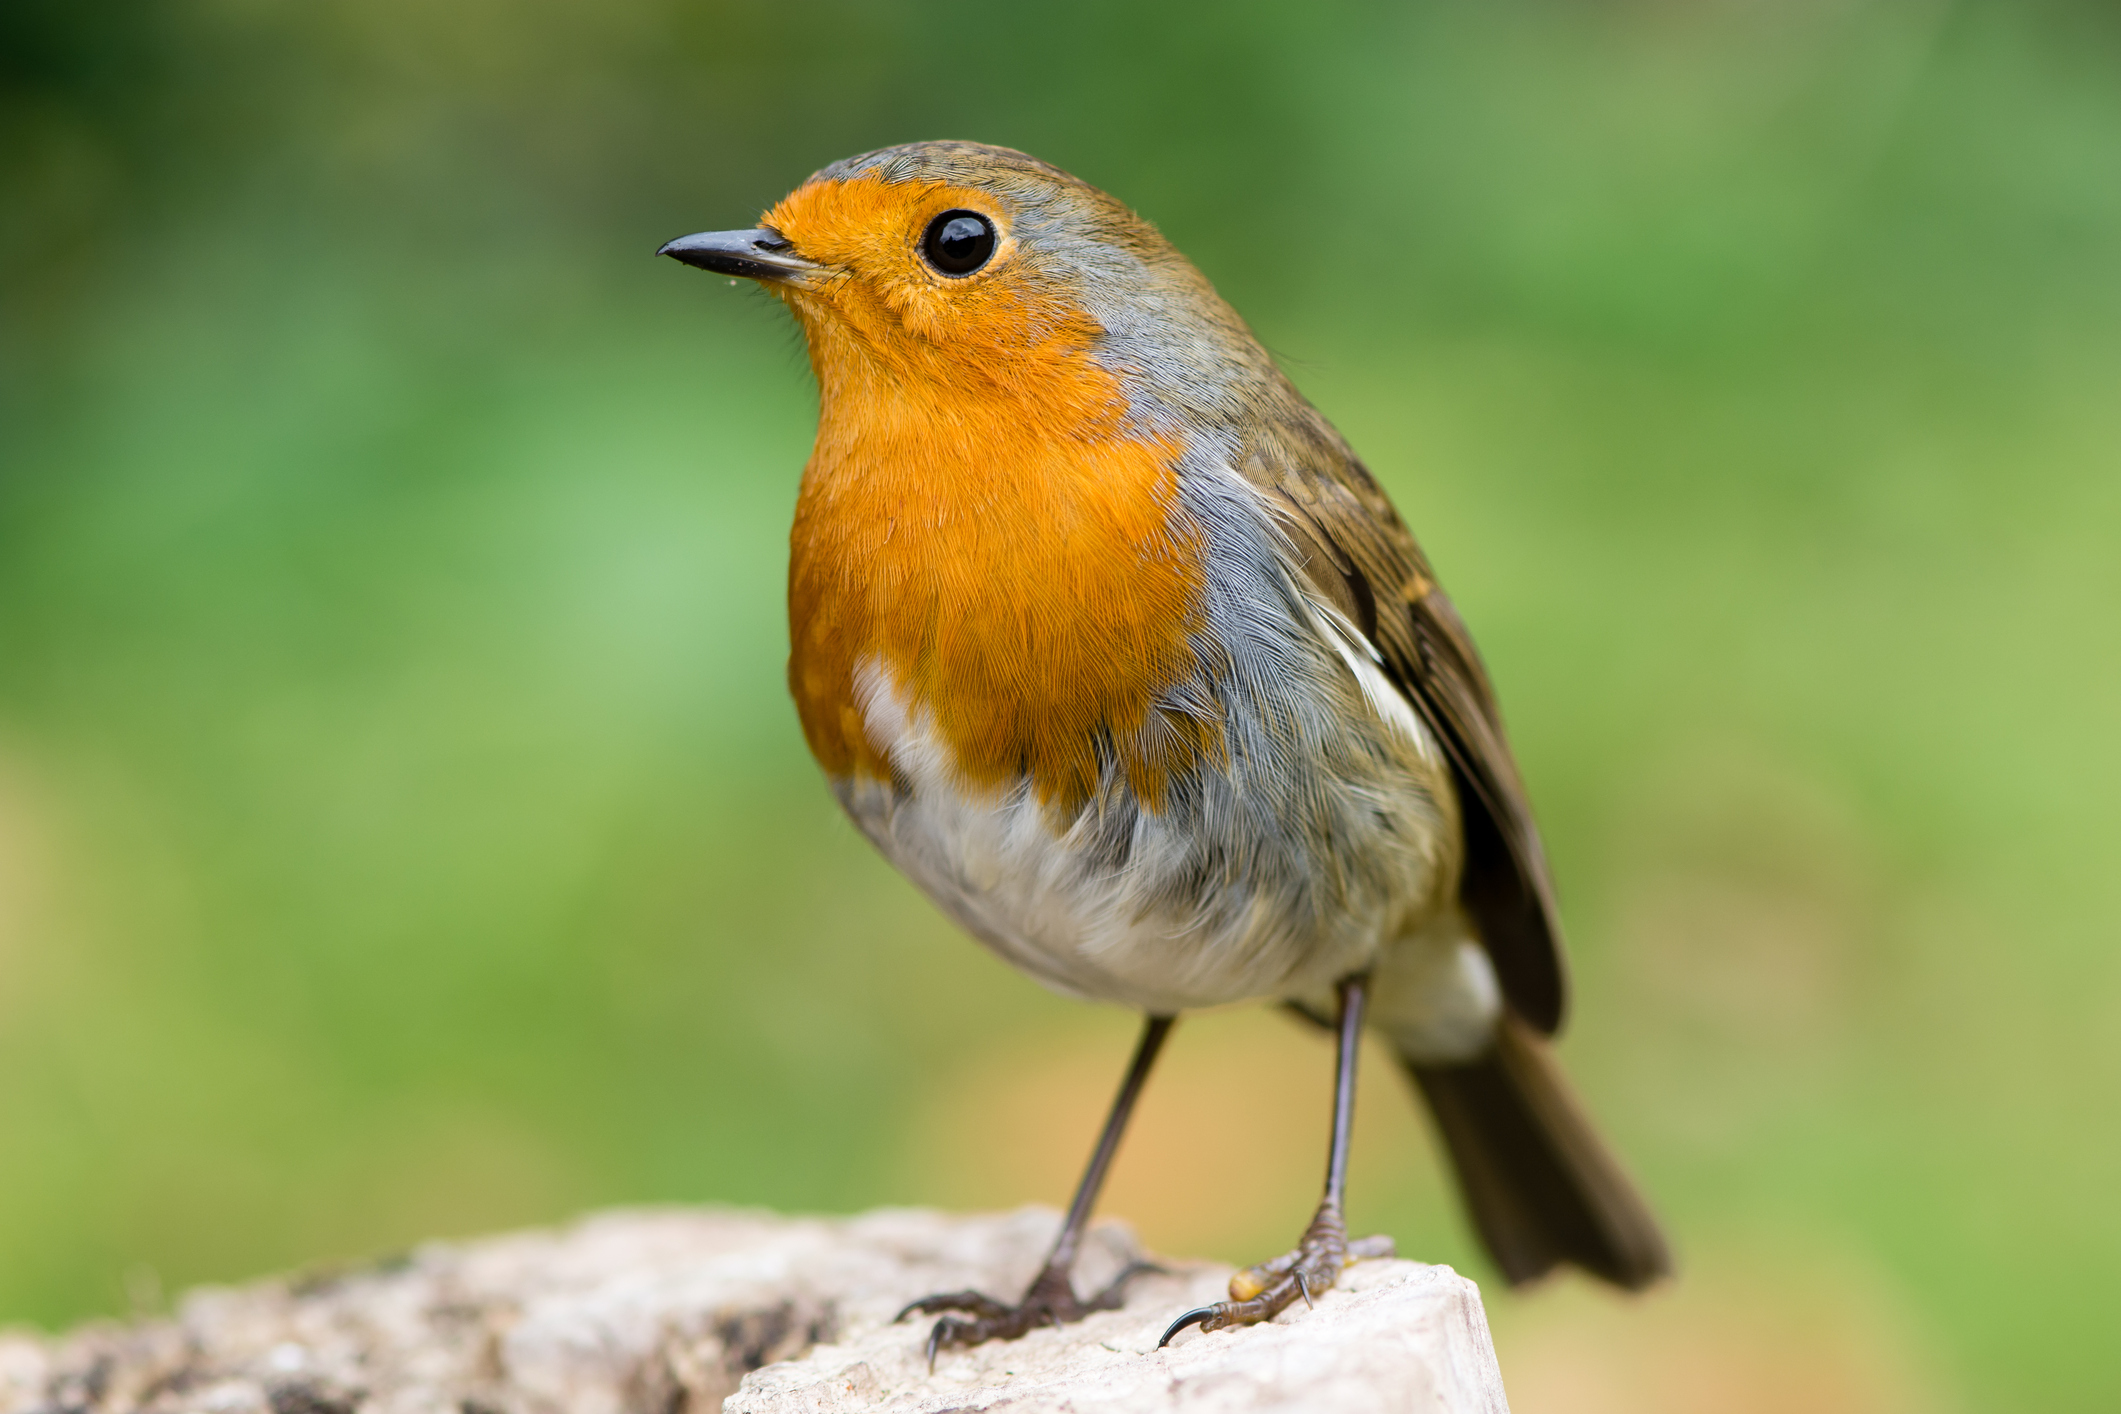 Bird Watching Near Your Home Boosts Mental Health